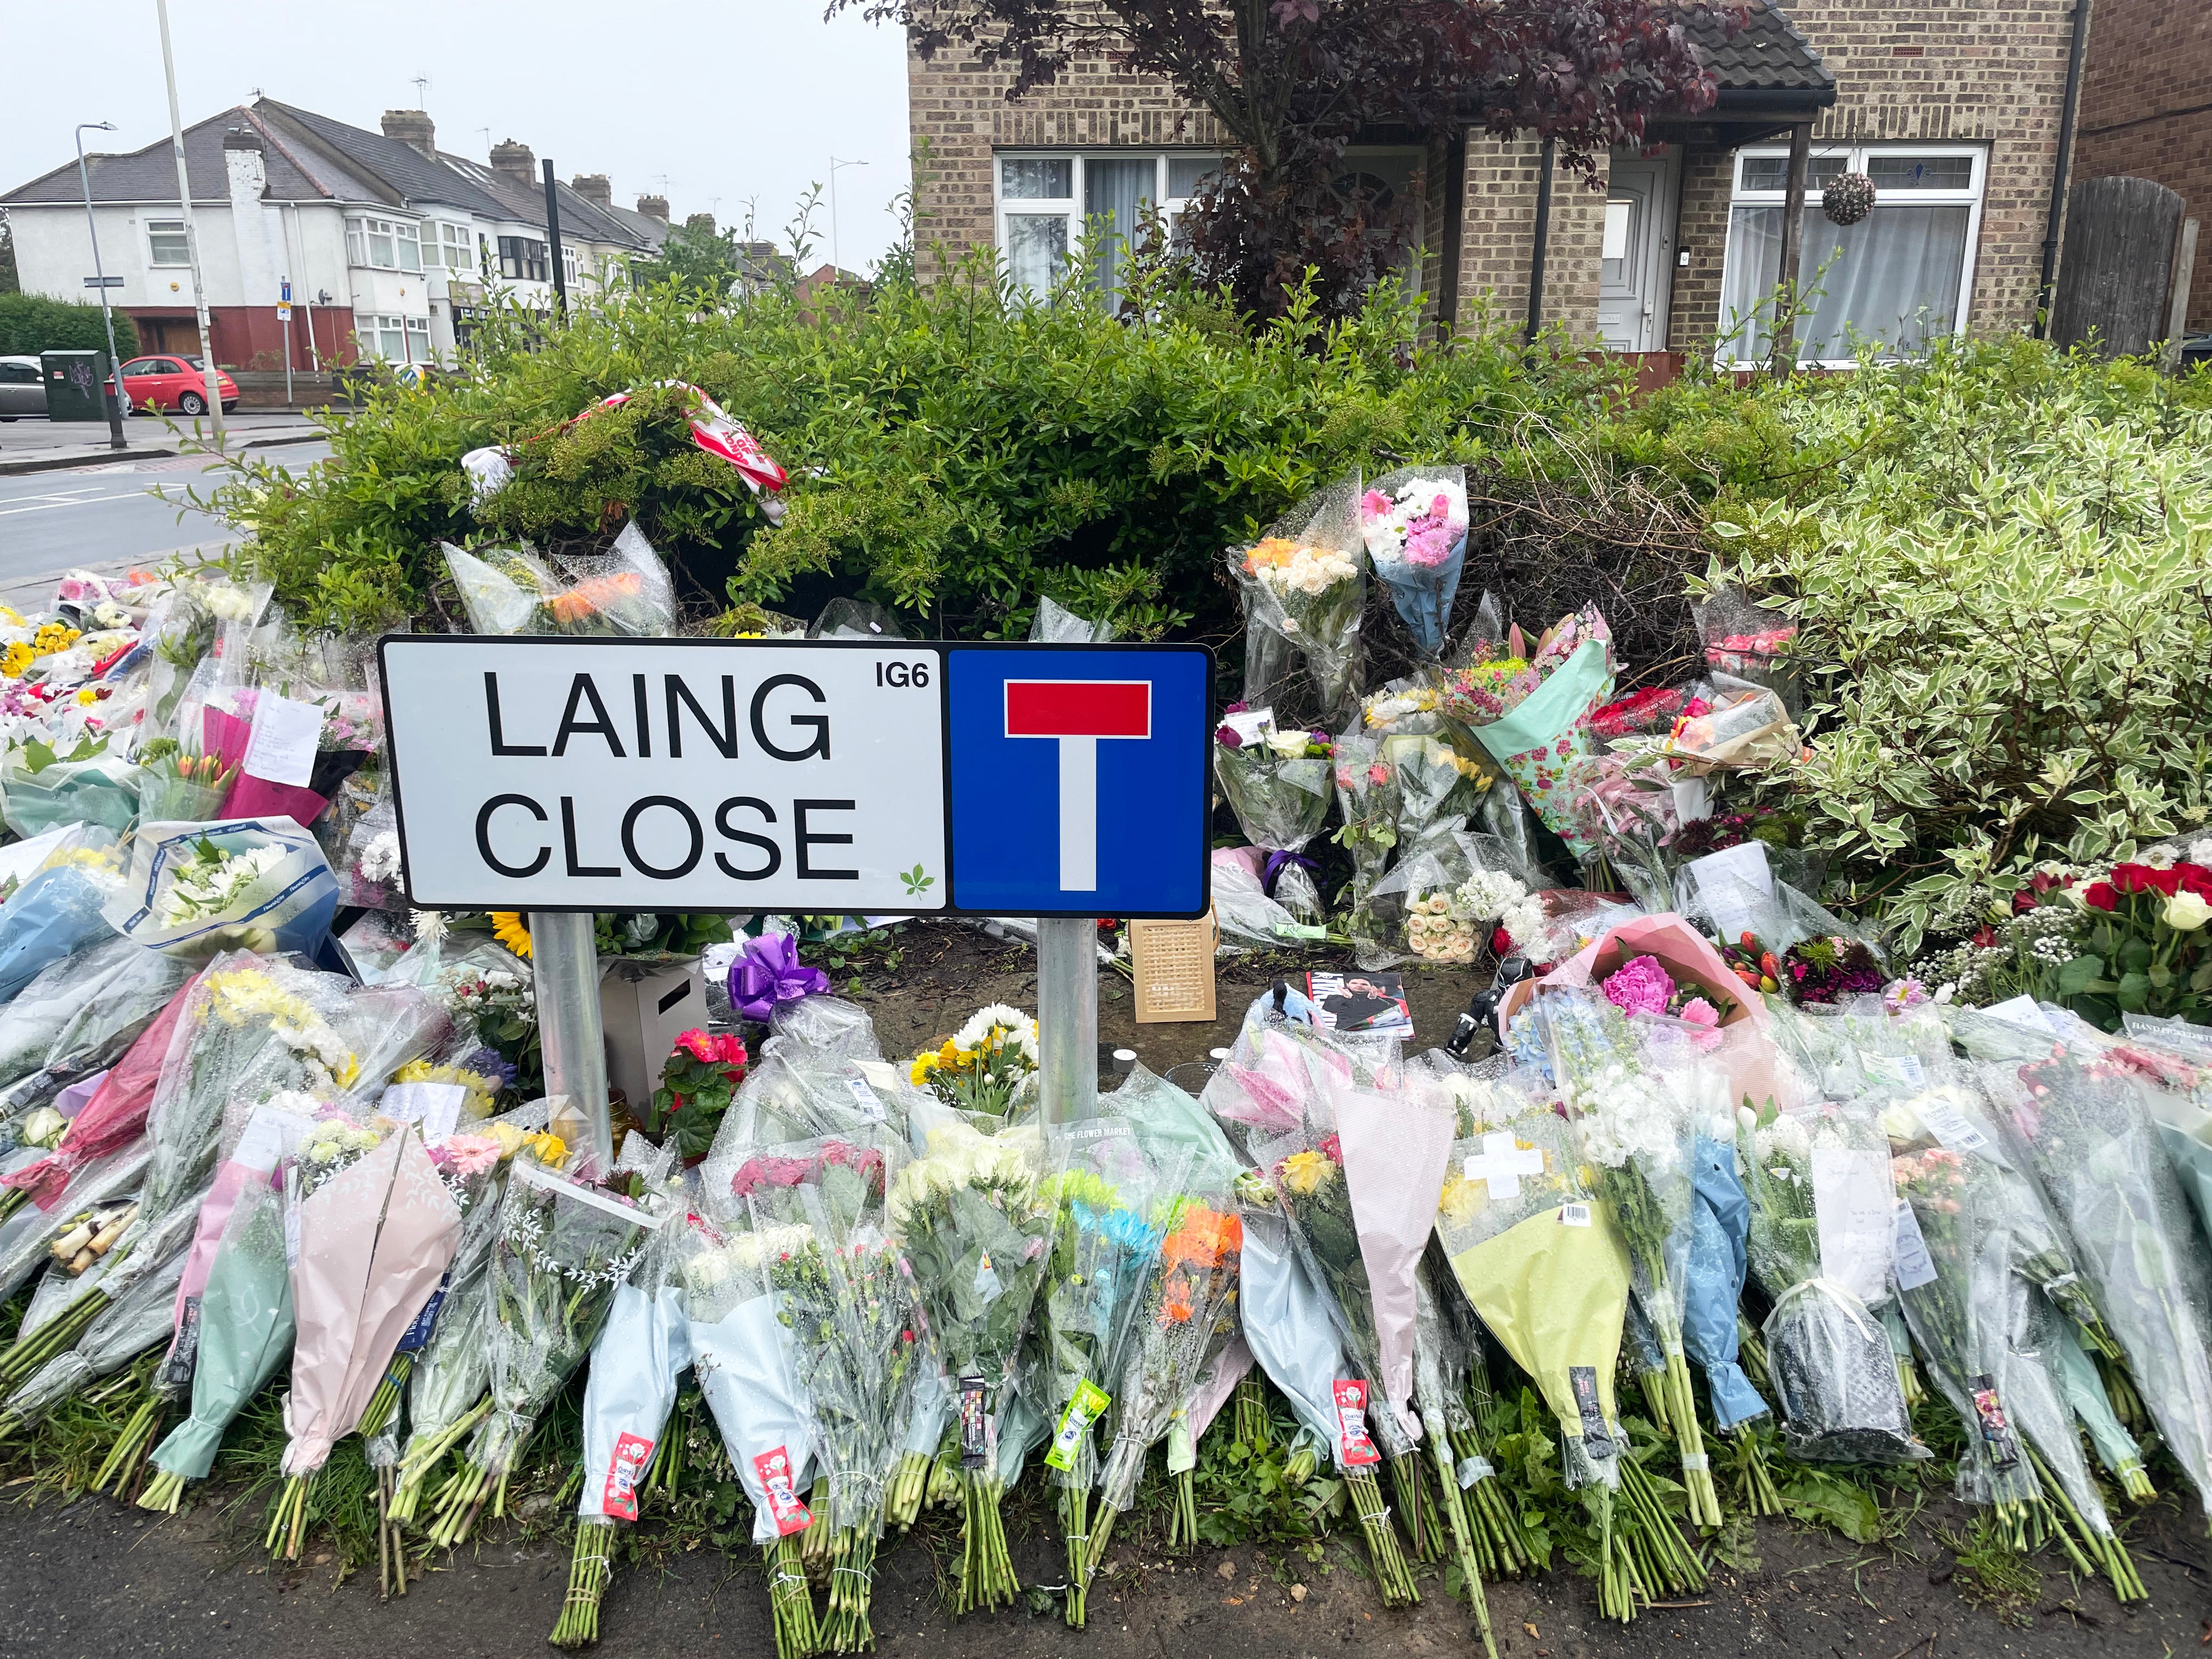 Floral tributes at the end of Laing Close near the scene in Hainault, northeast London